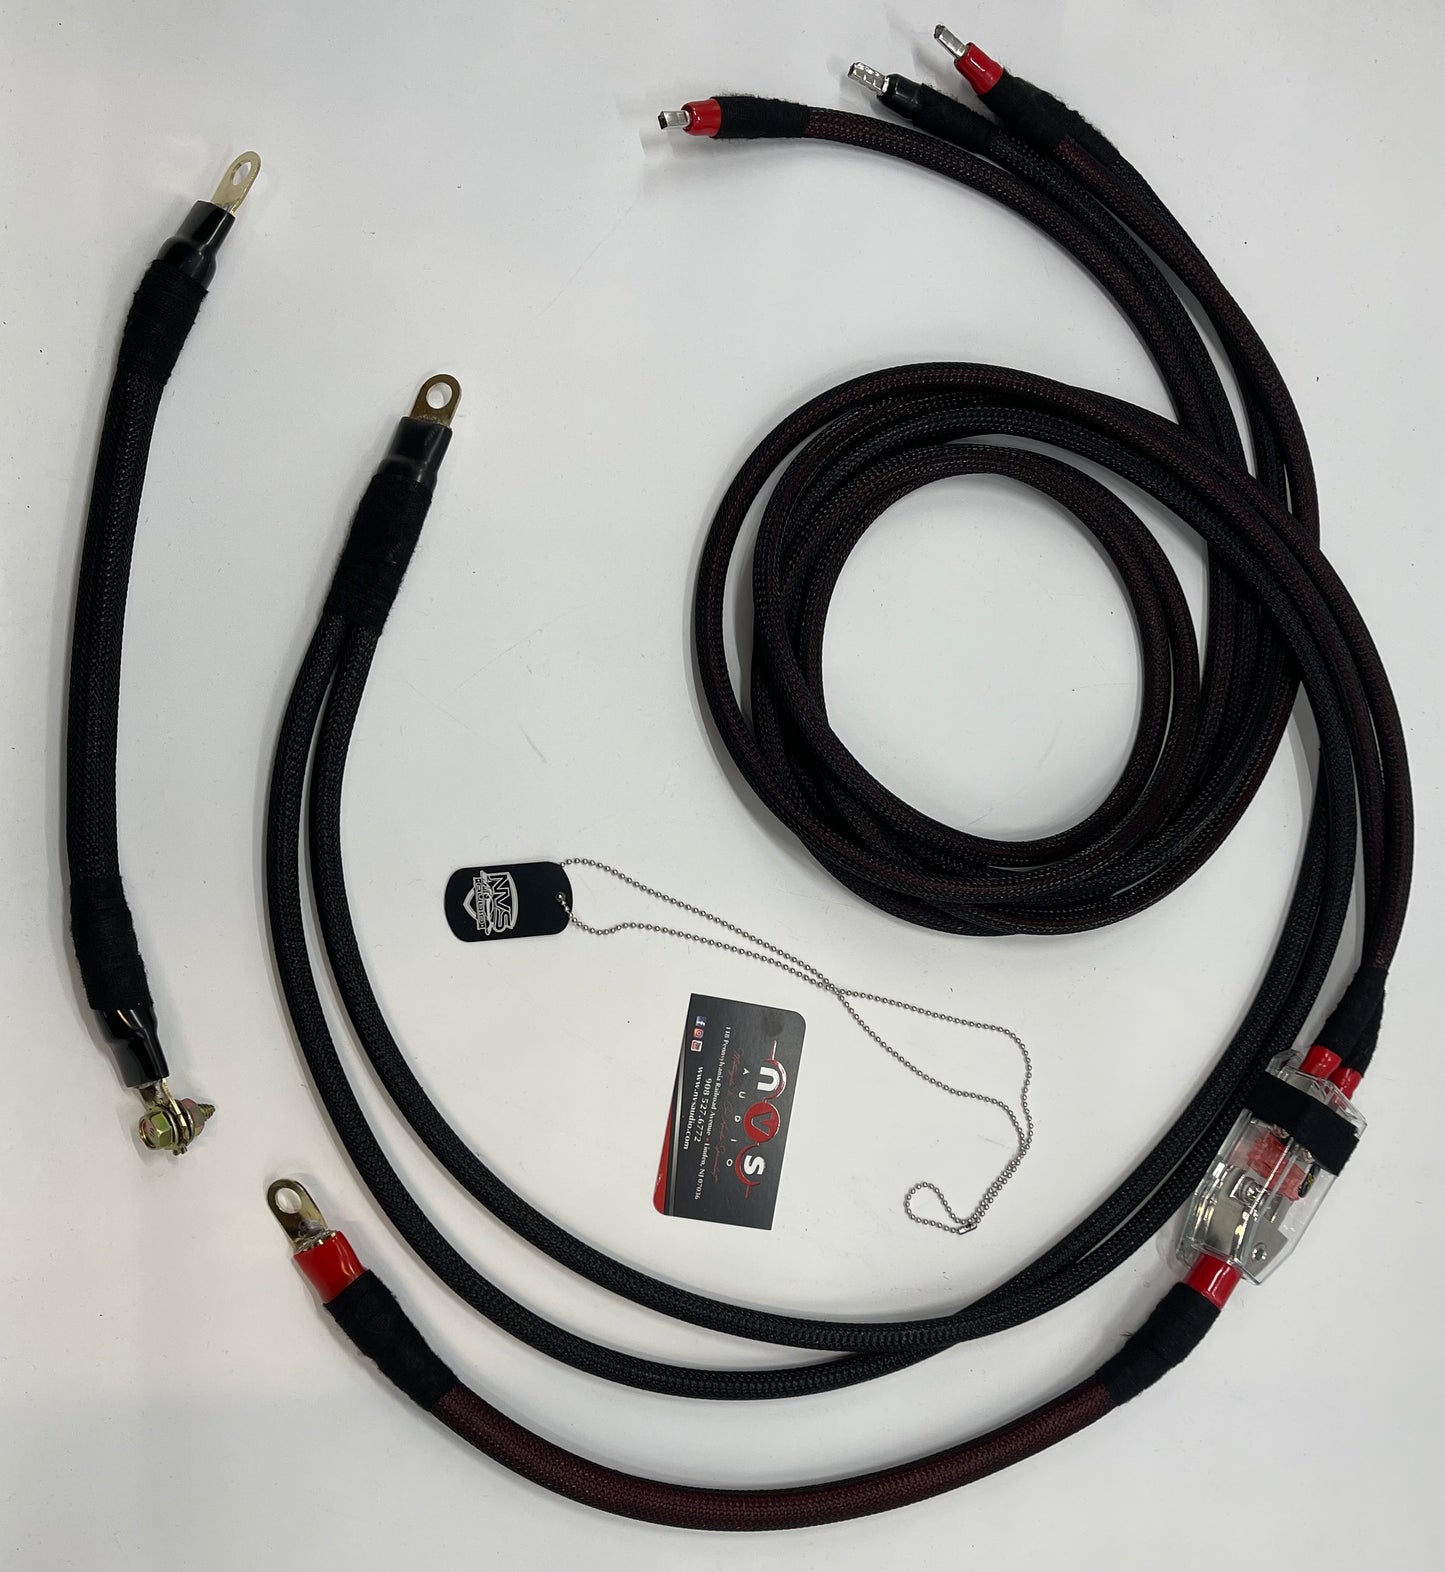 NVS Audio wire harness stage 5 ( 2 amps in the fairing 4 gauge )